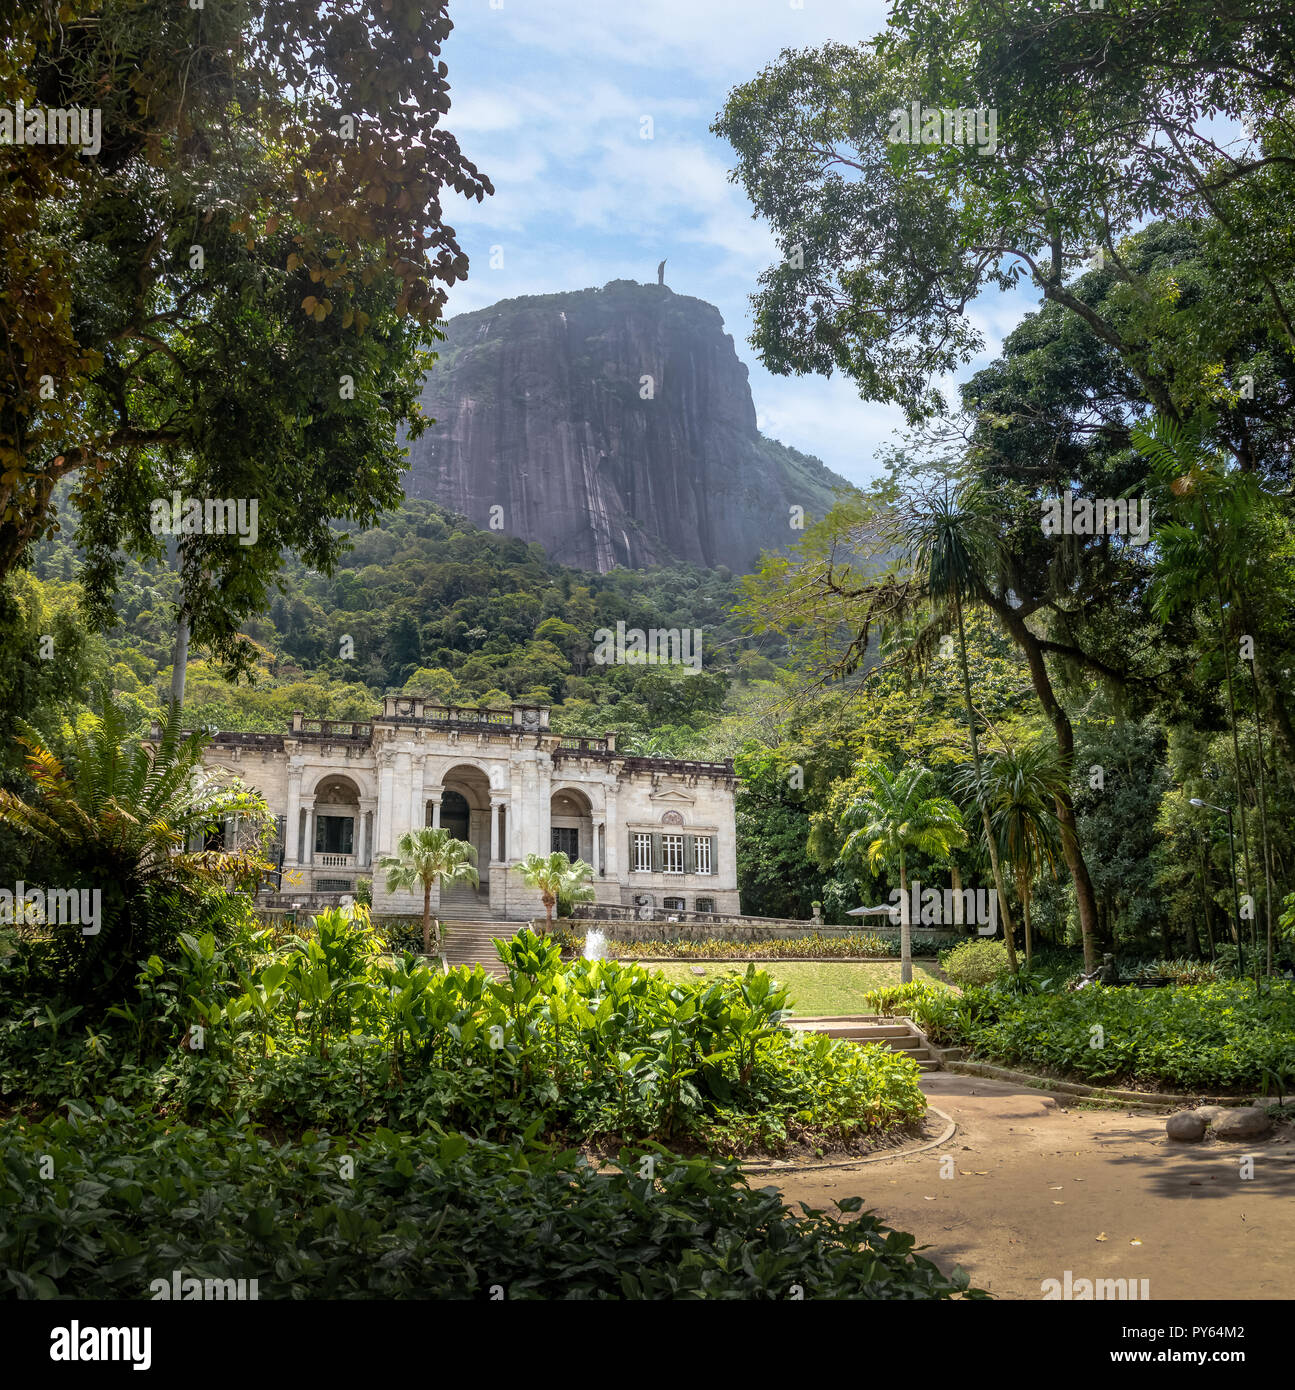 Parque Lage with Tijuca Forest and Corcovado Mountain on background - Rio de Janeiro, Brazil Stock Photo